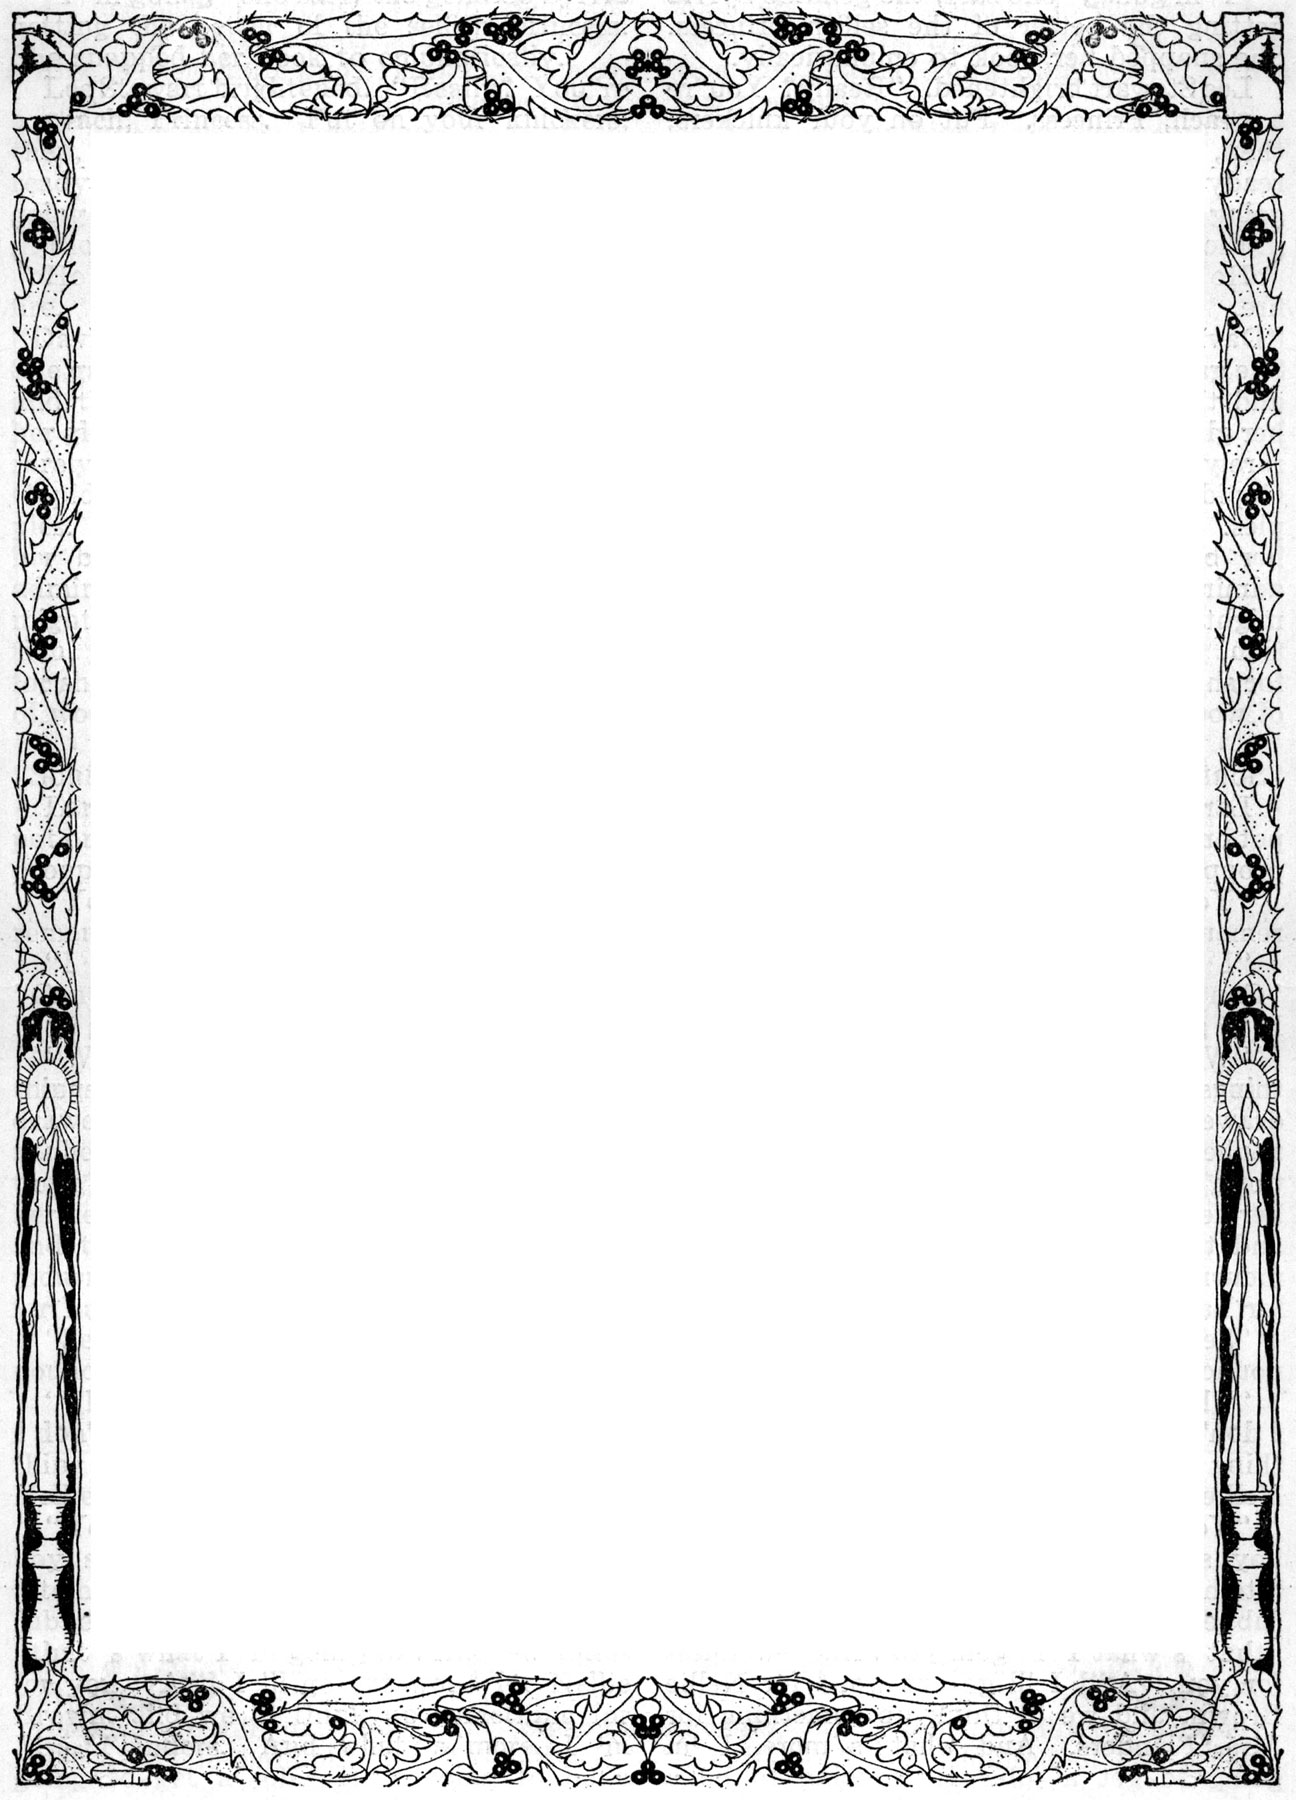 image-result-for-frames-templates-for-word-documents-clip-art-borders